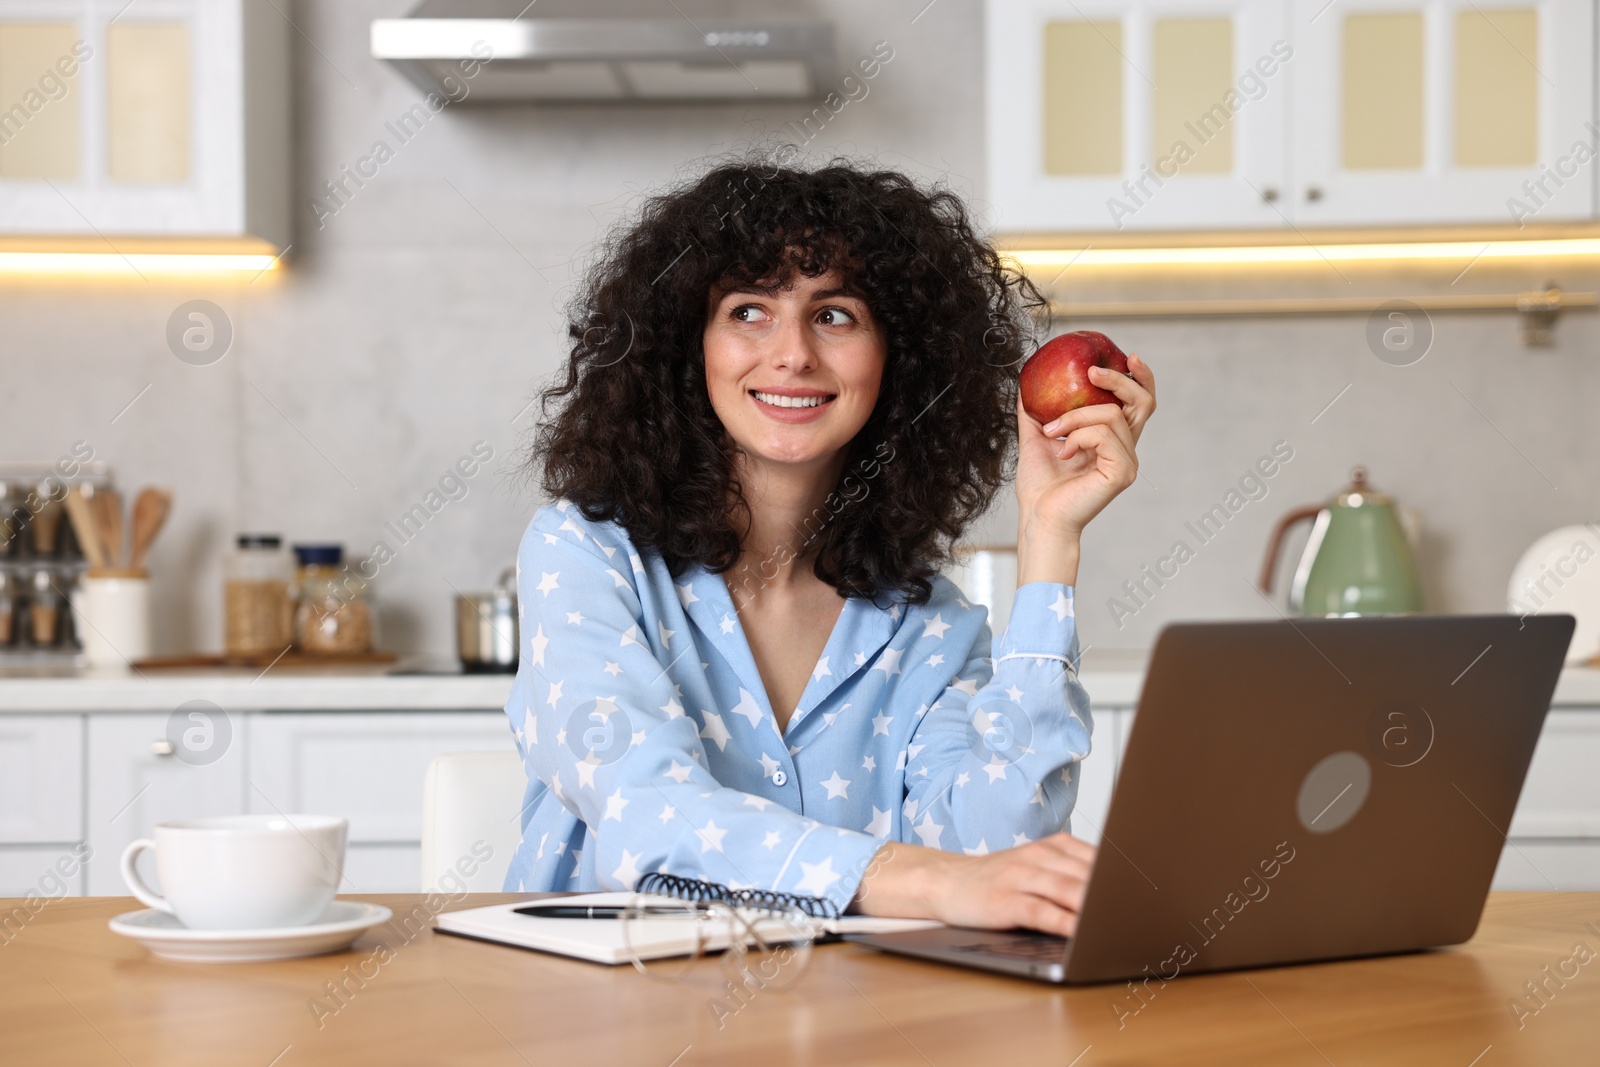 Photo of Beautiful young woman in stylish pyjama with apple using laptop at wooden table in kitchen